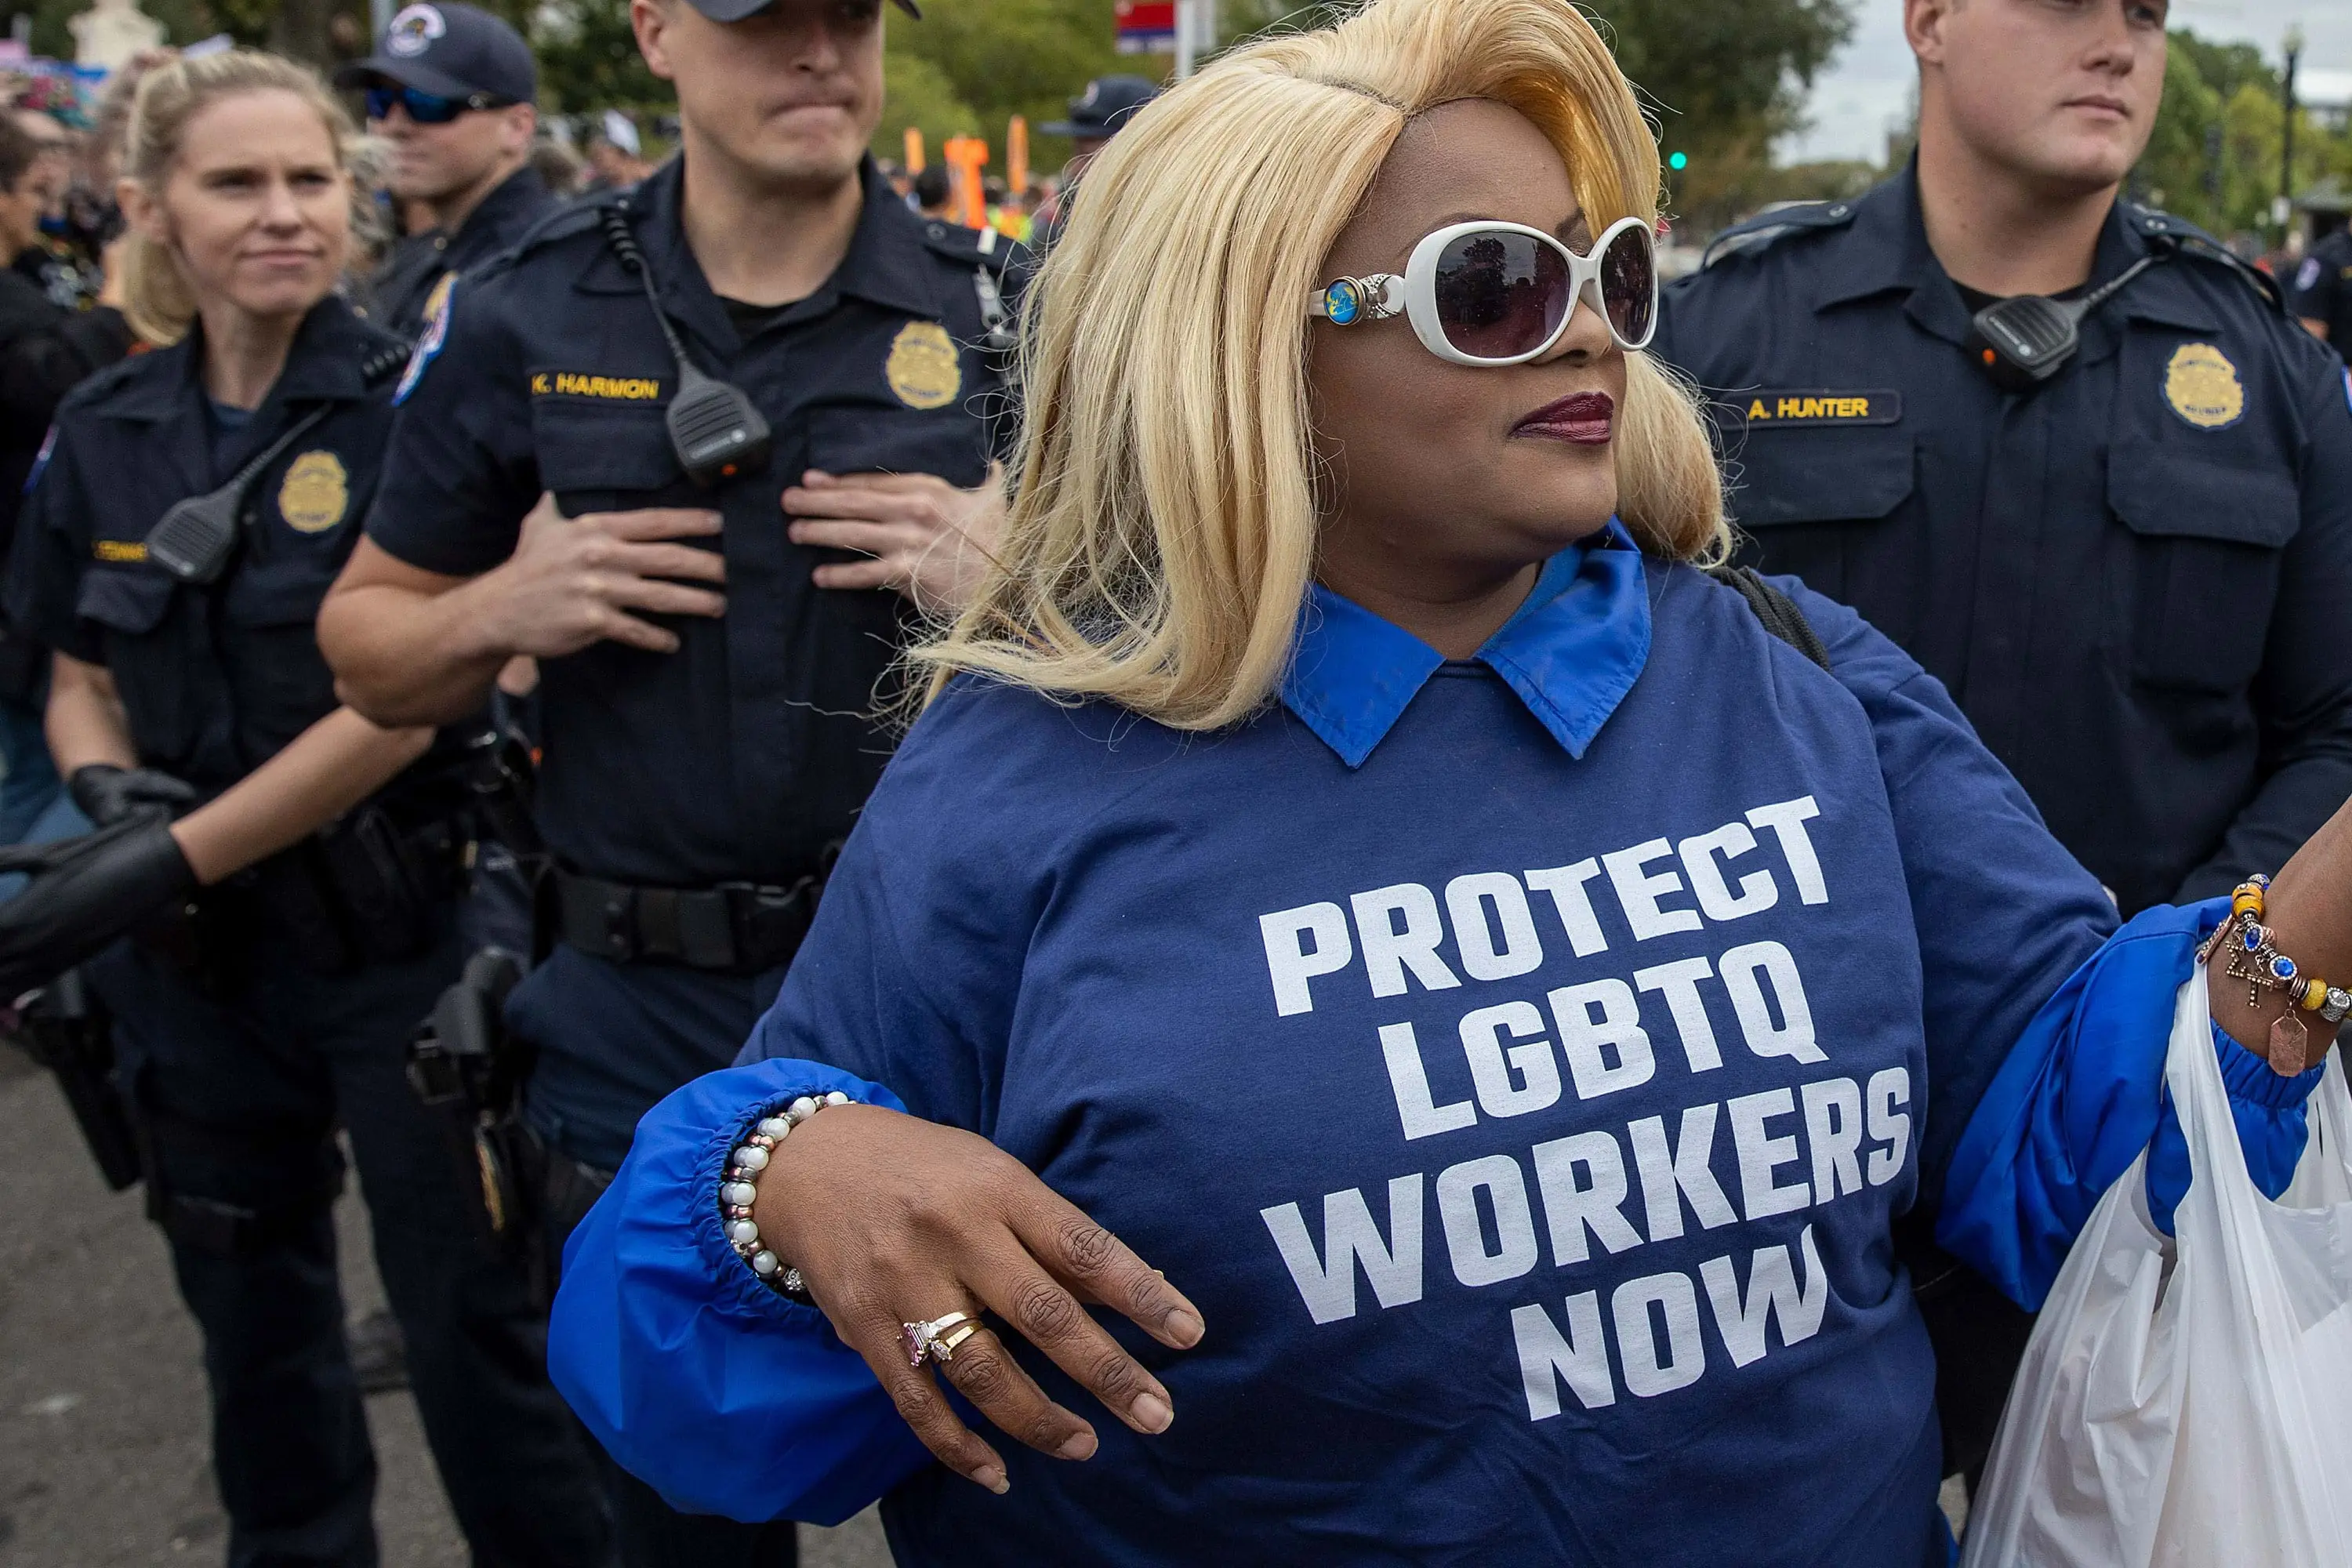 A Black person in sunglasses, long blonde hair, and a shirt that says "PROTECT LGBTQ WORKERS NOW" stands with their back to white police officers.